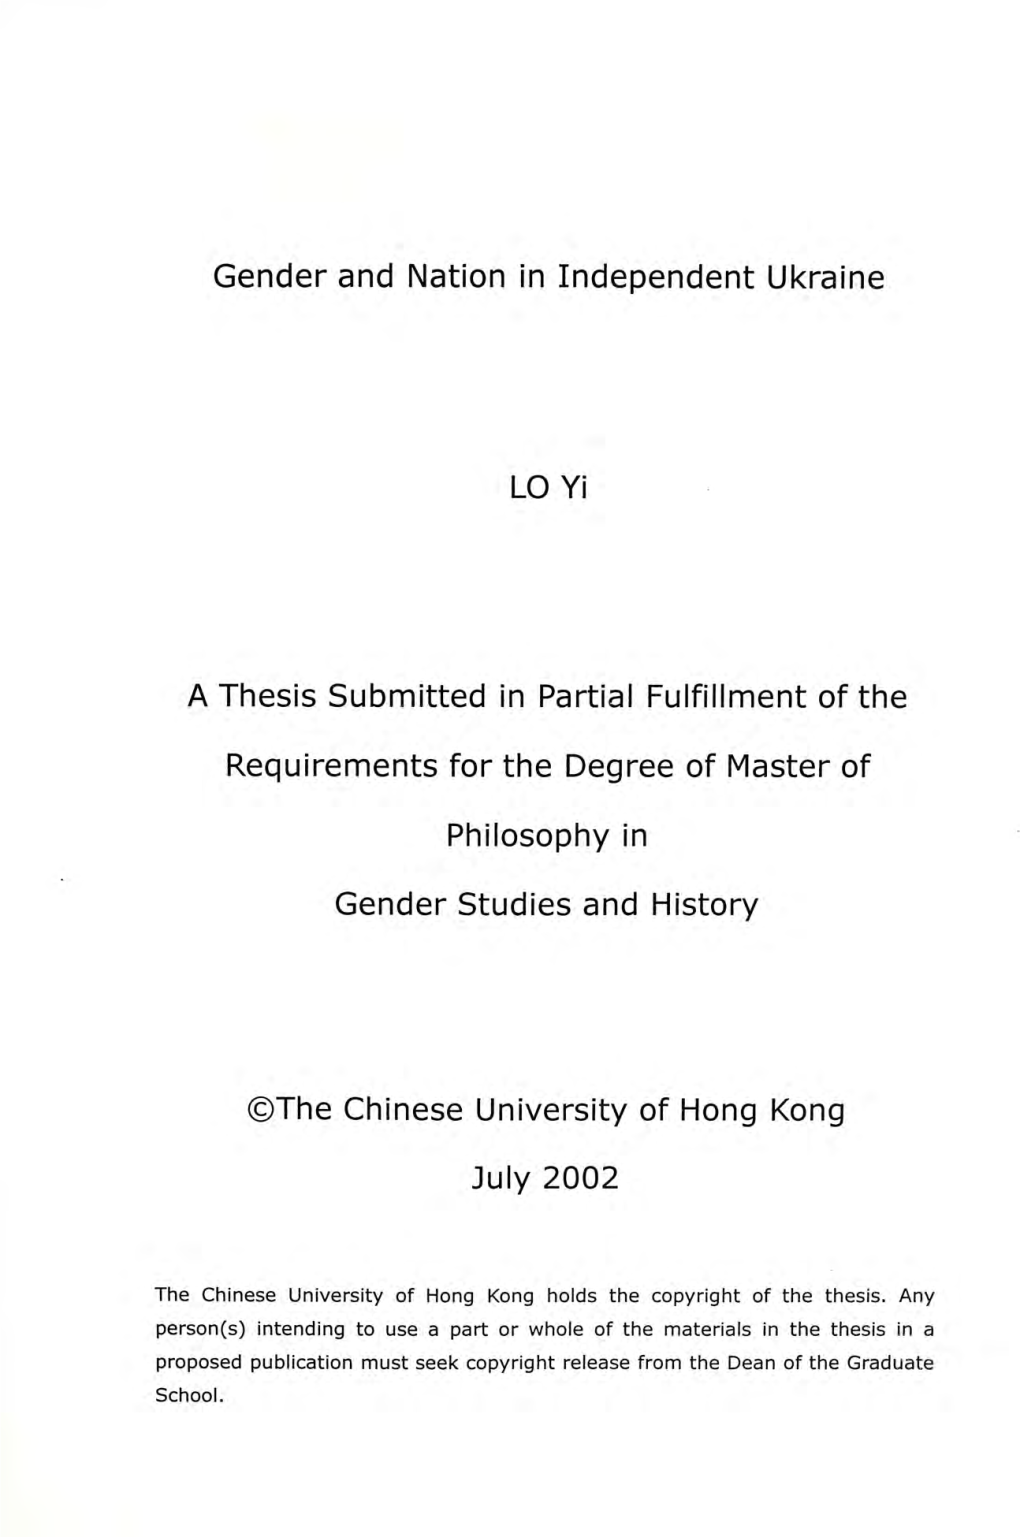 Gender and Nation in Independent Ukraine LO Yi a Thesis Submitted